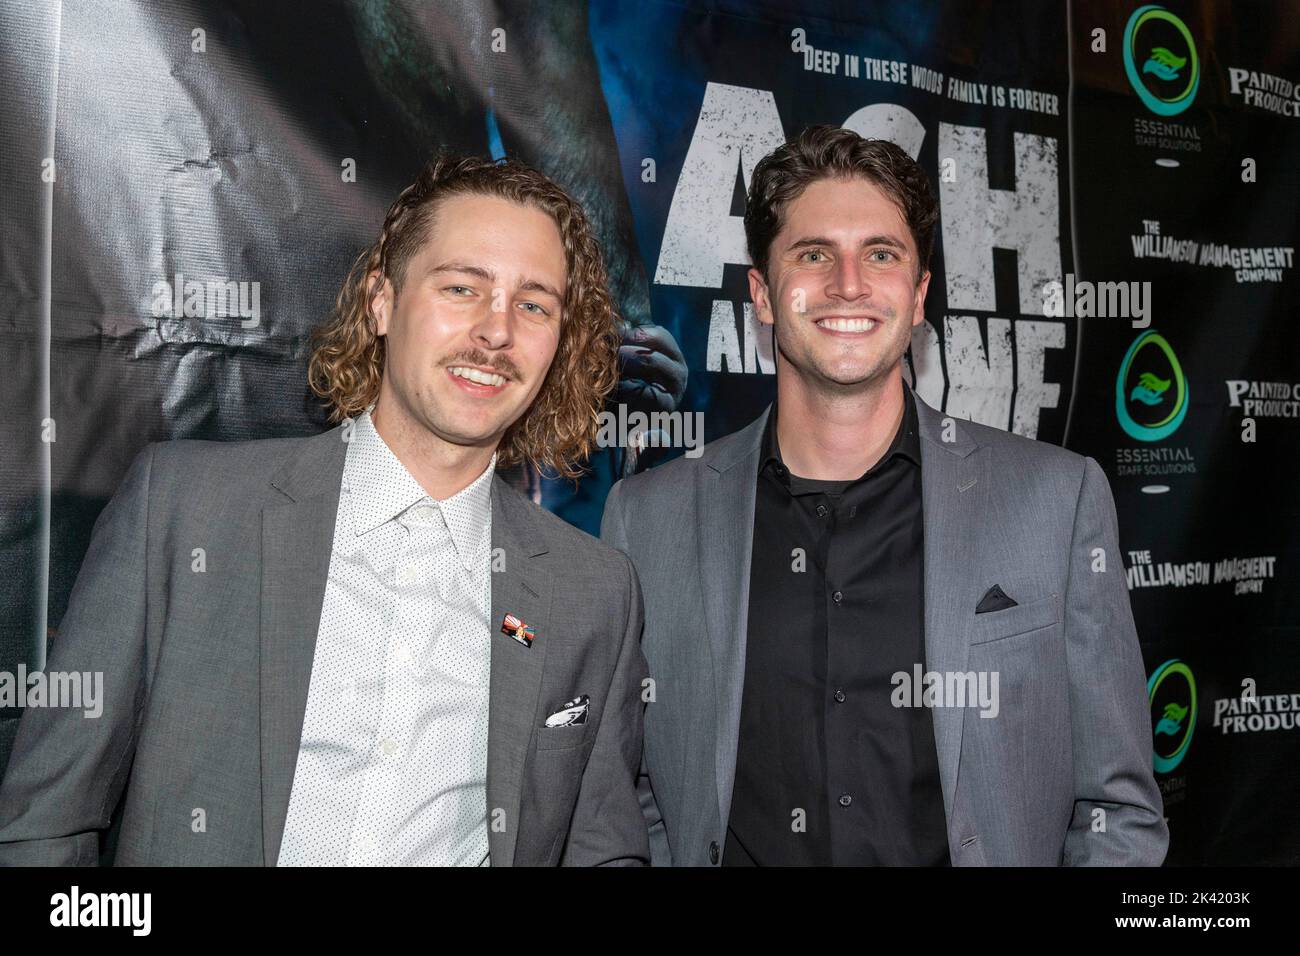 Encino, CA, September 28, 2022, Victor Lord, Bret Miller attend Los Angeles Premiere of 'Ash and Bone' at Laemmle Town Center 5, Encino, CA on September 28, 2022 Stock Photo